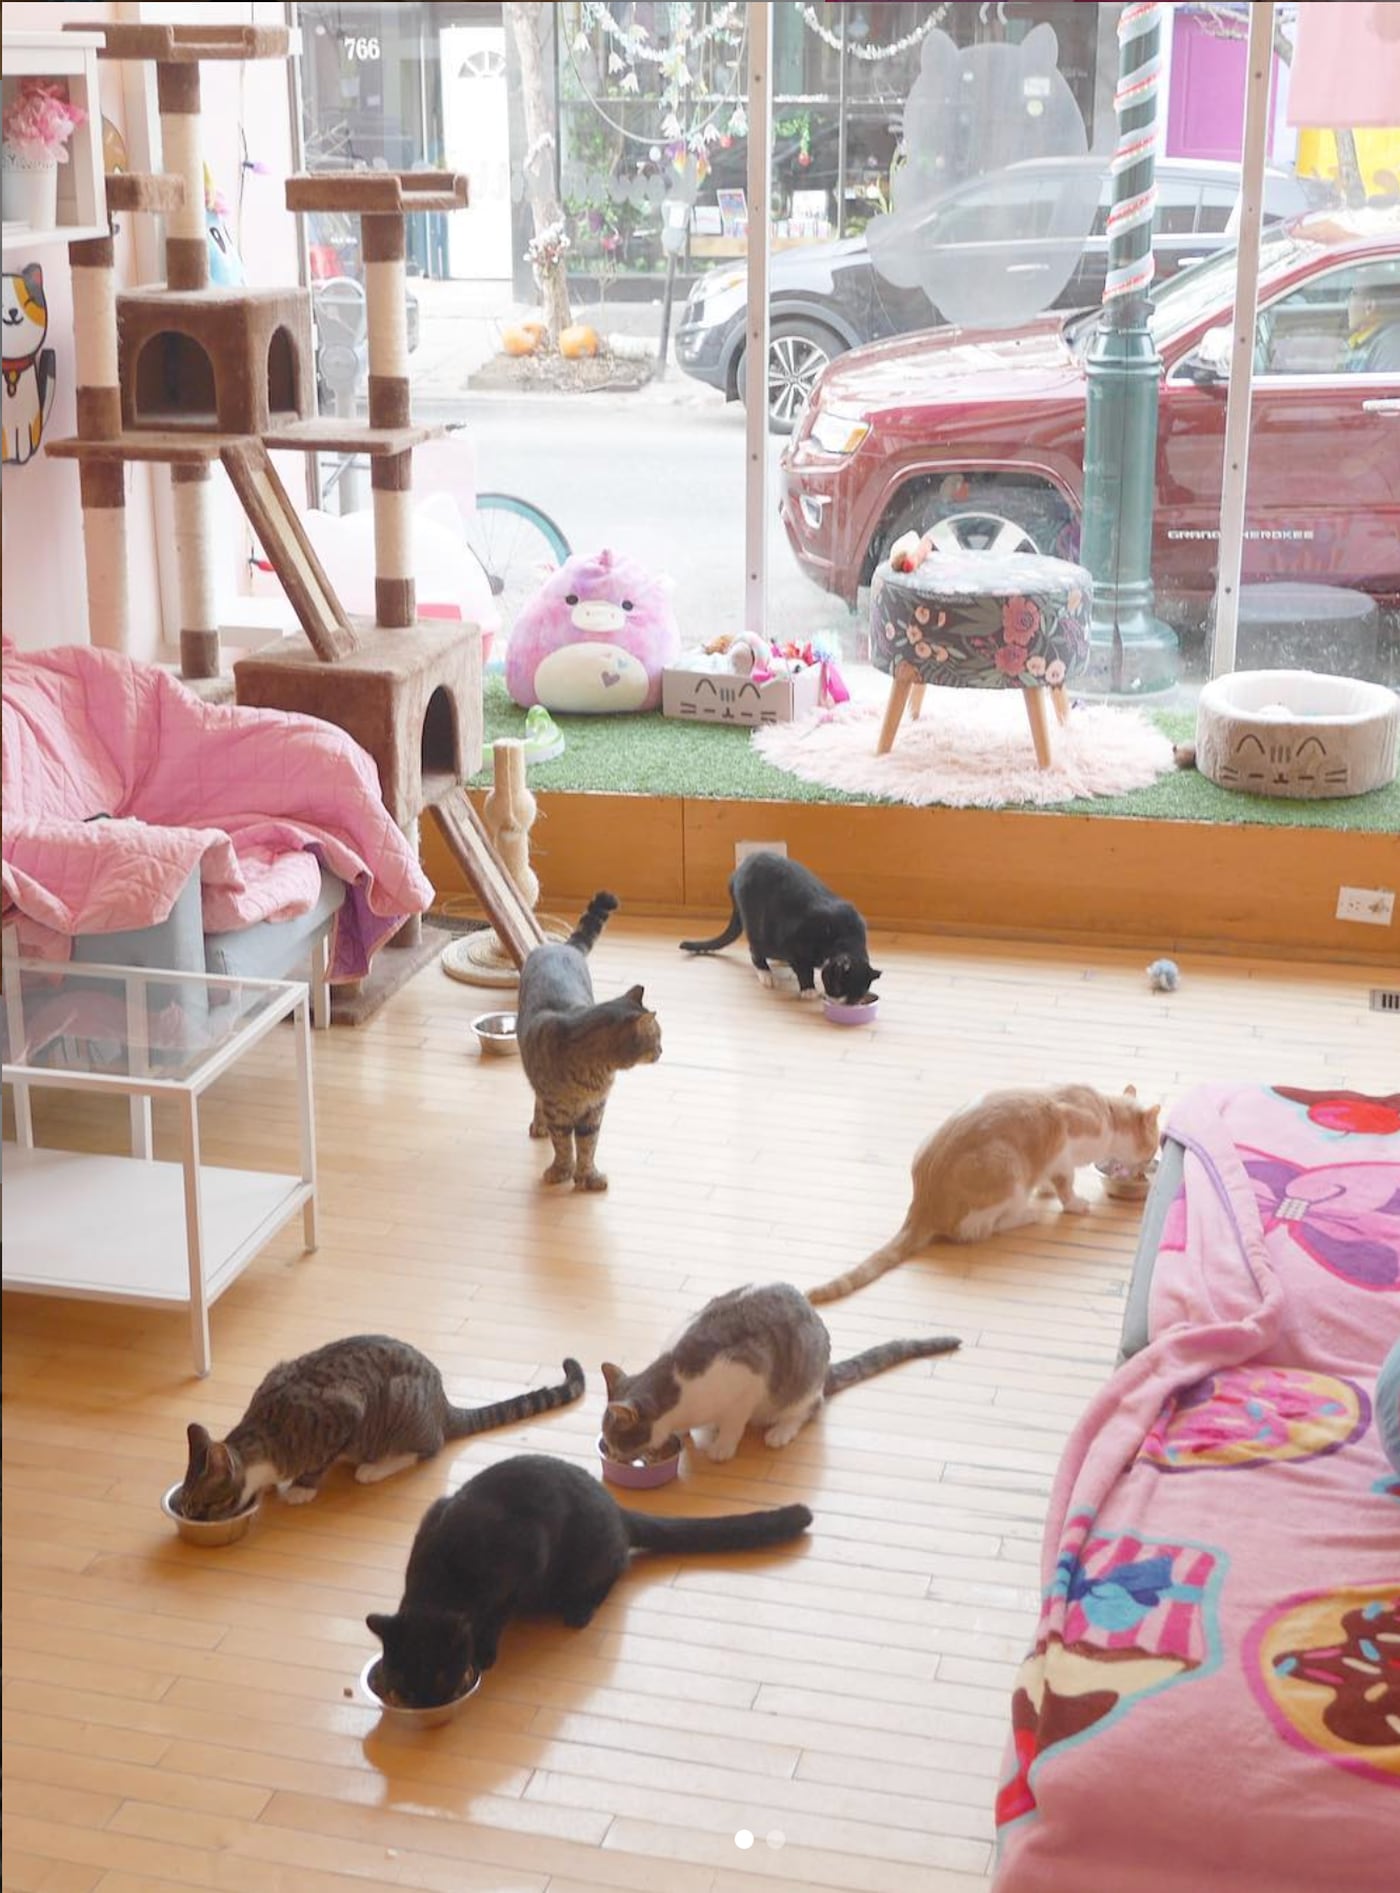 What’s a cat cafe to do during the coronavirus pandemic? Here’s how